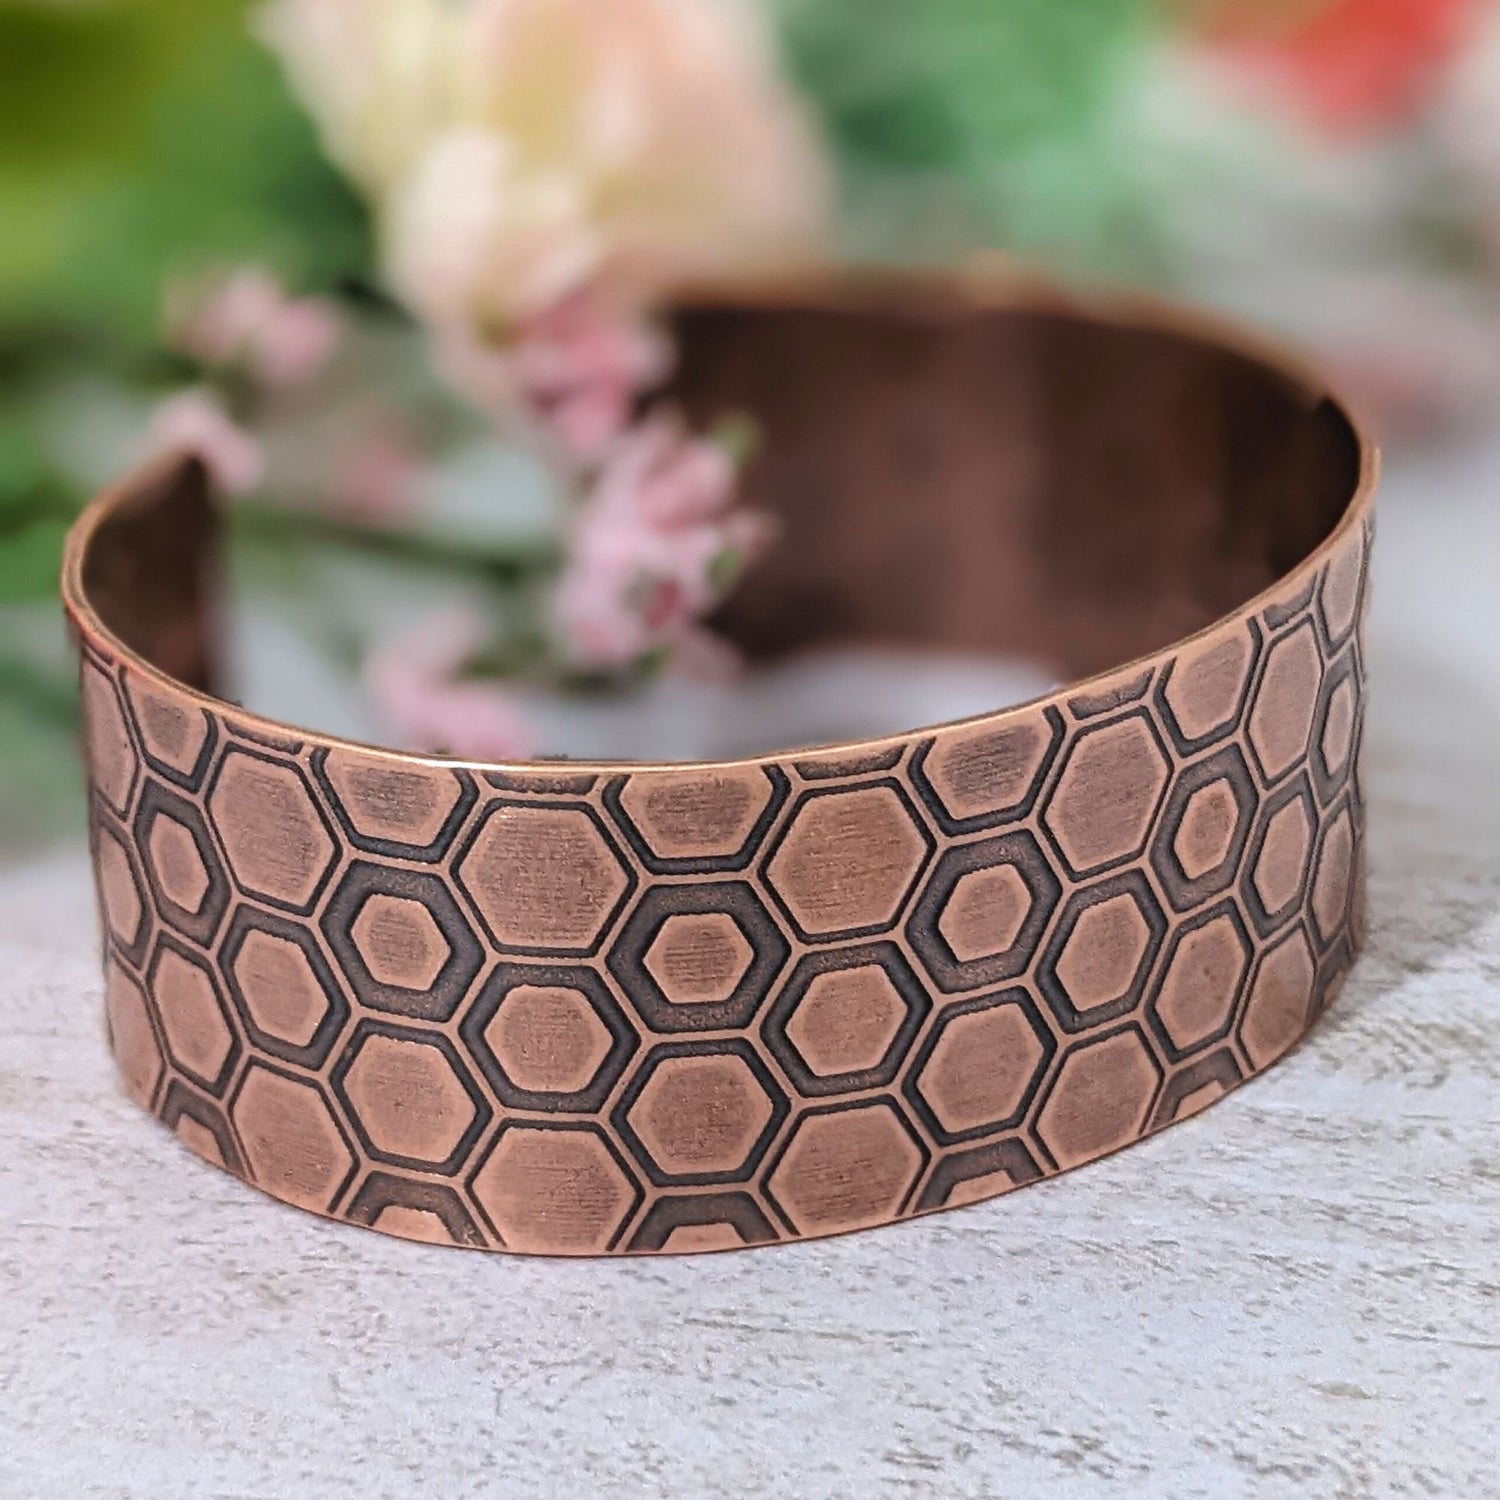 One inch wide copper cuff bracelet with a honeycomb pattern. Each vertical row of combs has a little over 3  combs. The comb edges are impressed into the copper and darkened to bring out the detail.